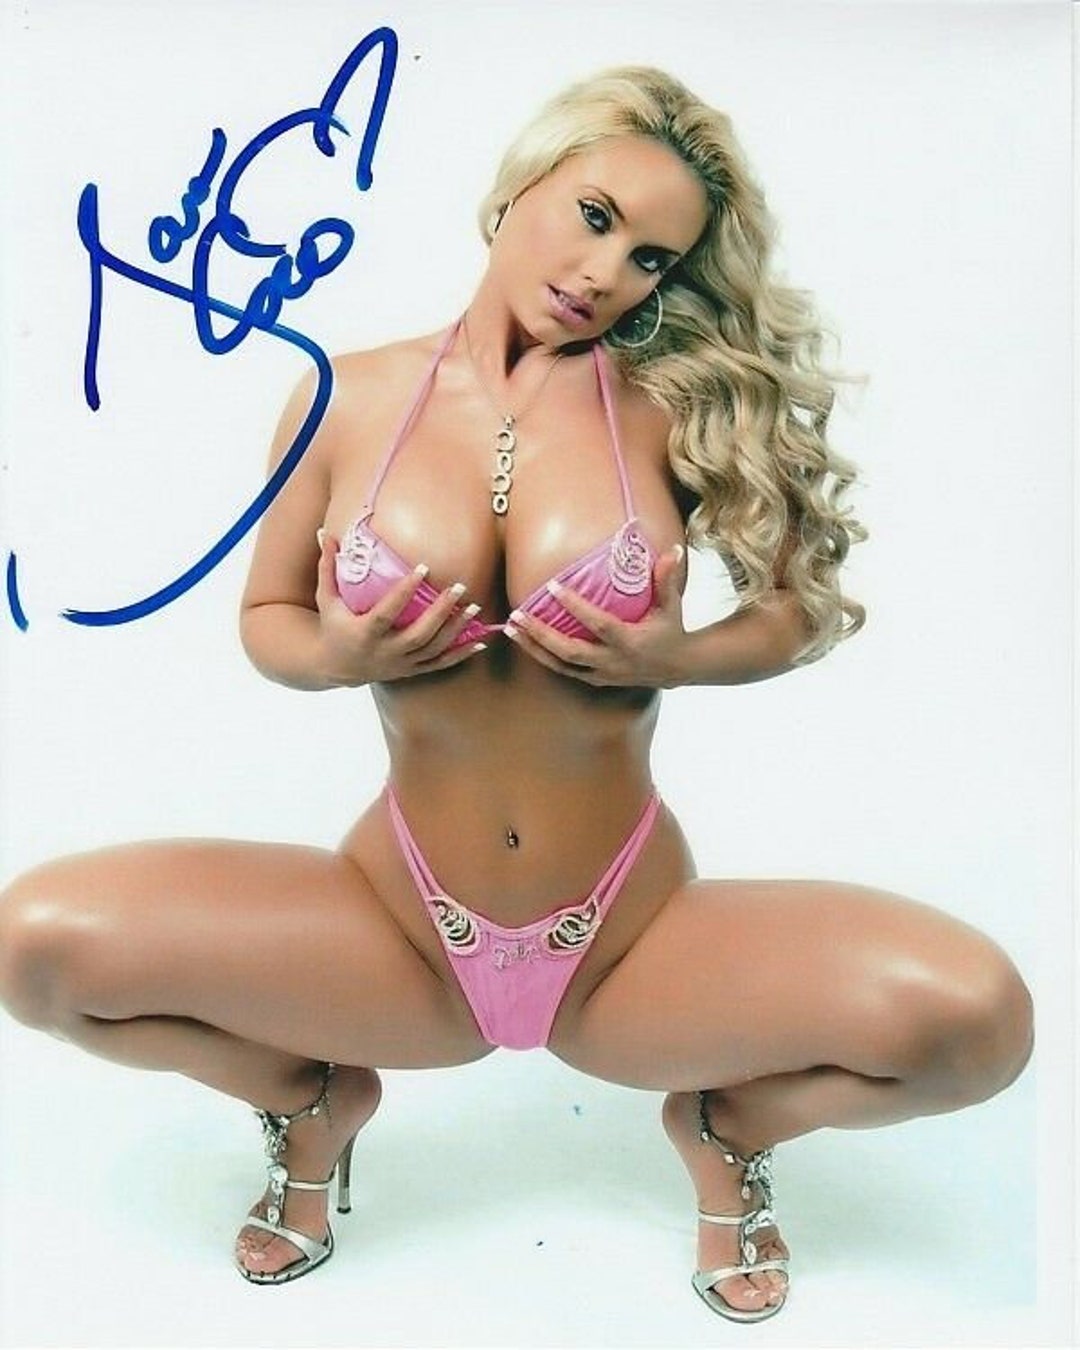 becky houge share coco austin in lingerie photos